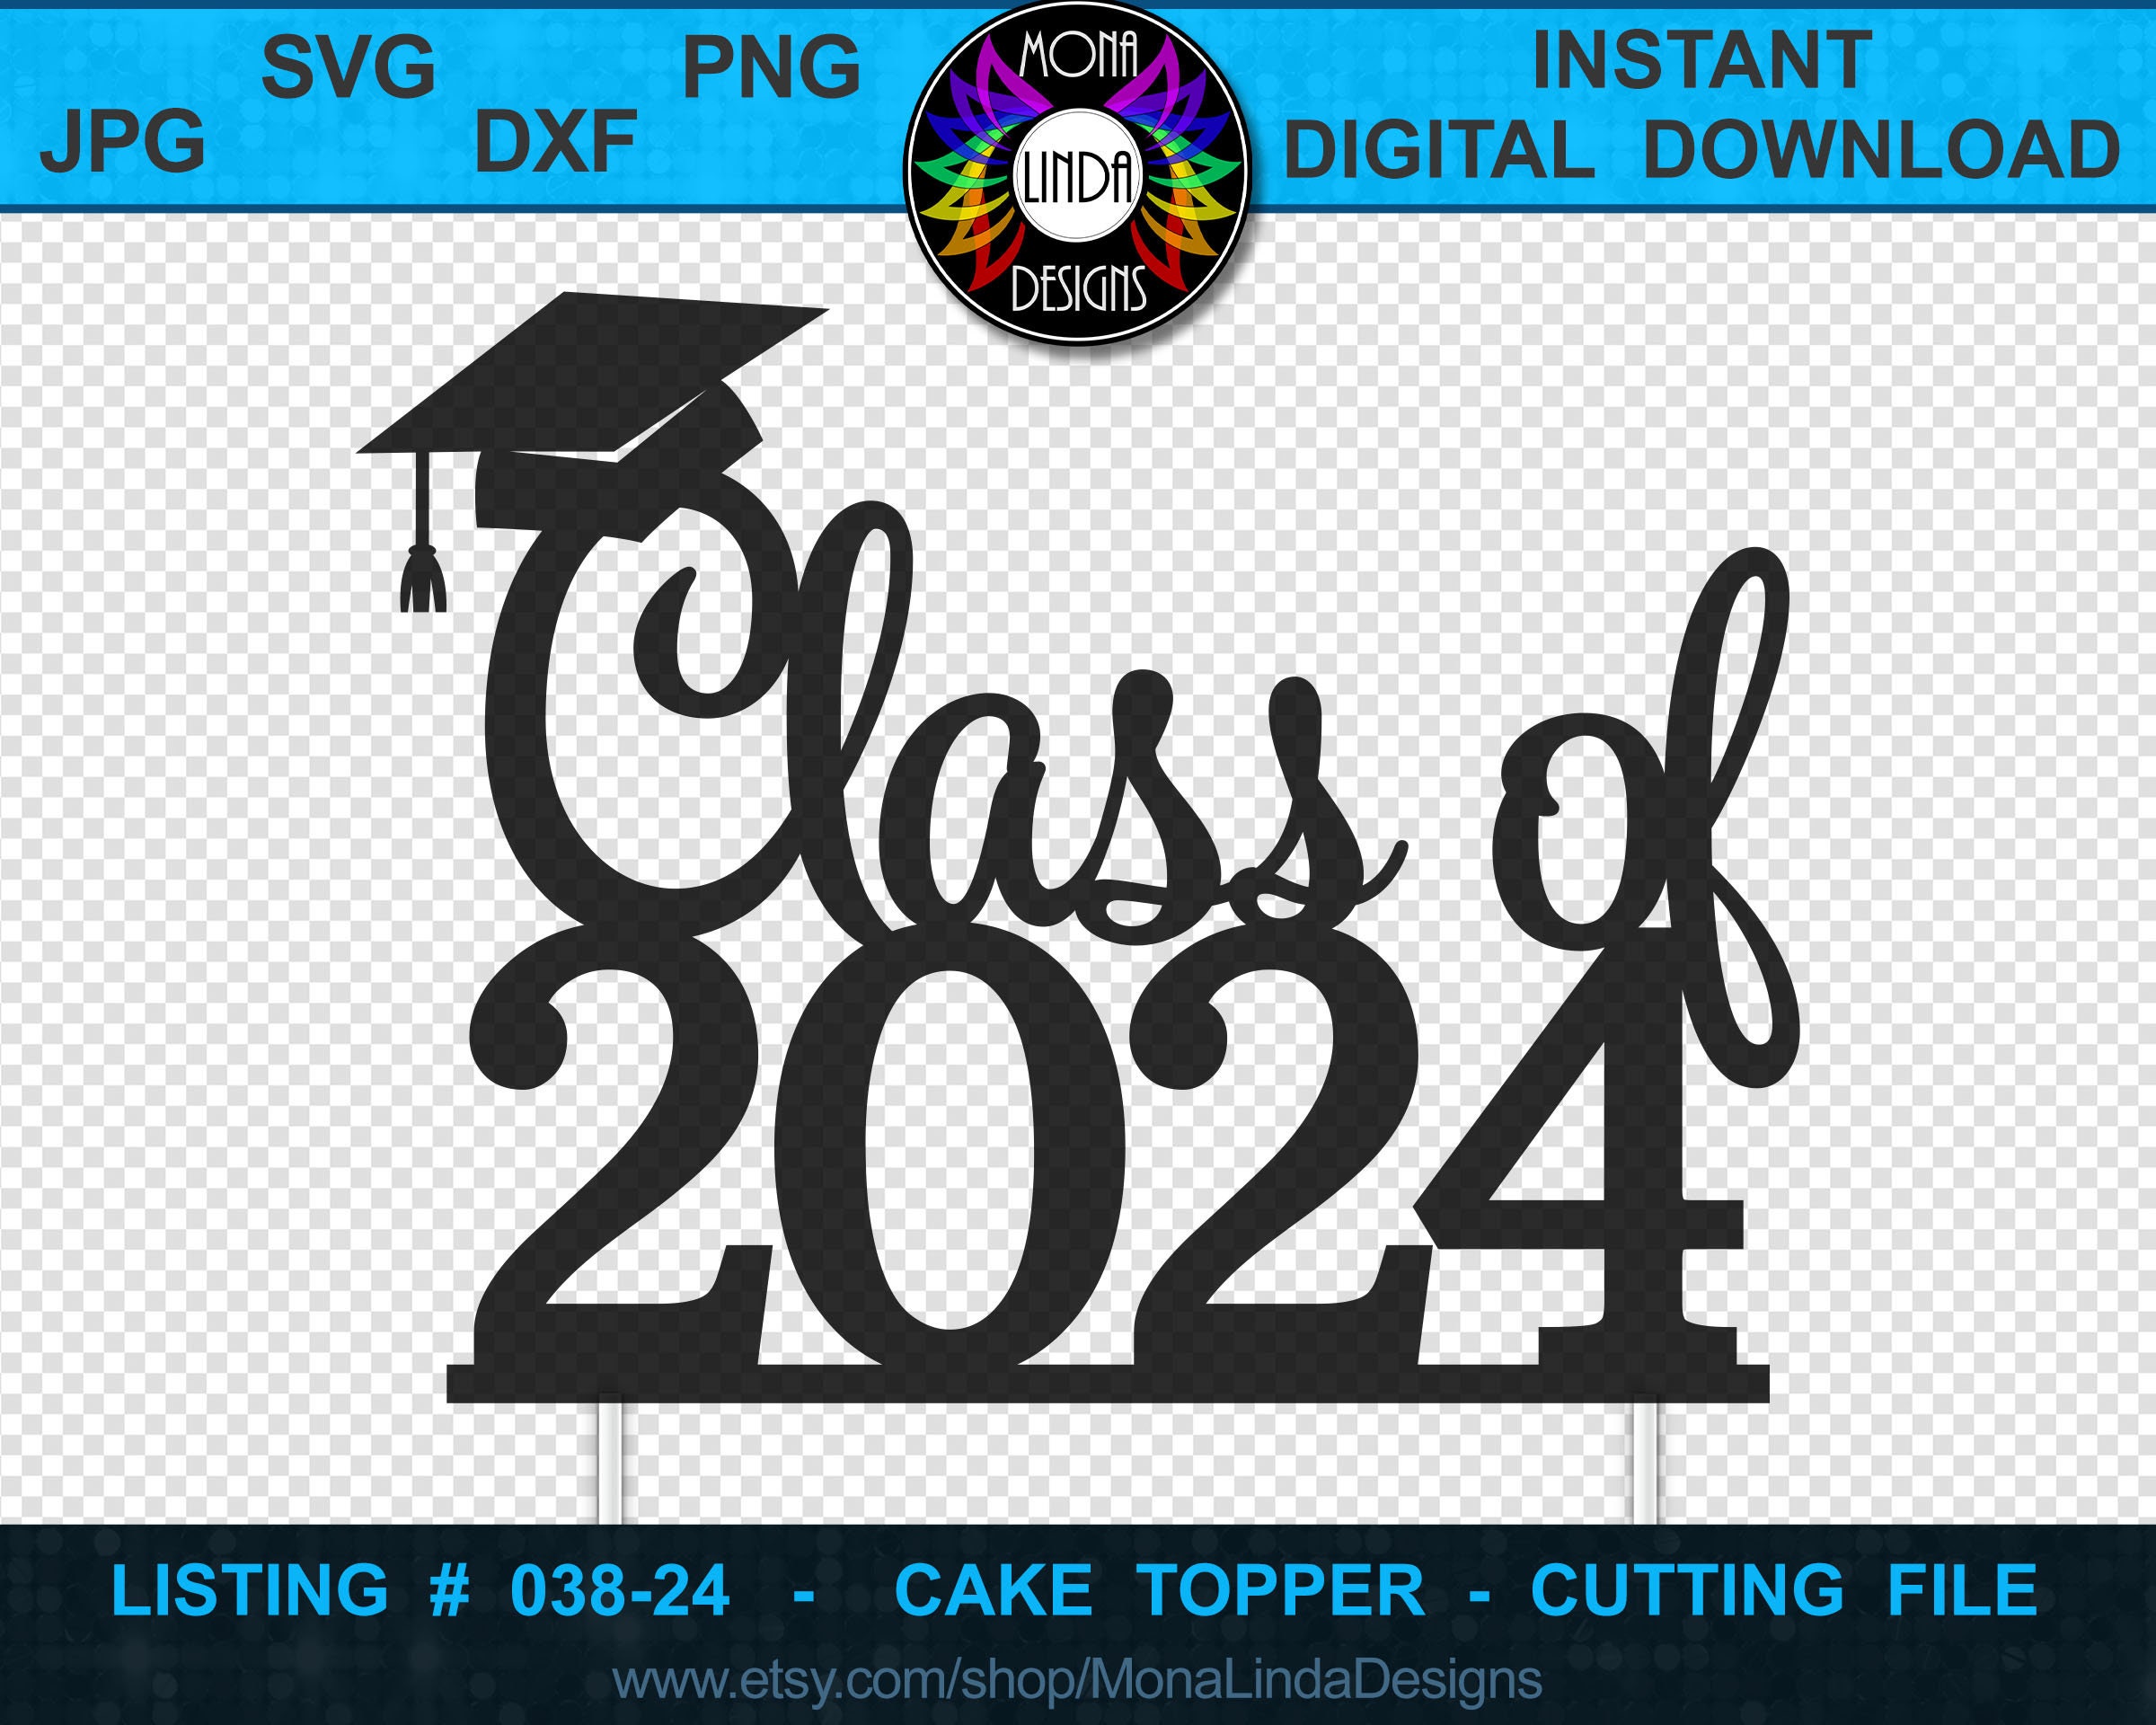 Cake Topper Class of 2024 SVG PNG DXF Cutting File Etsy UK